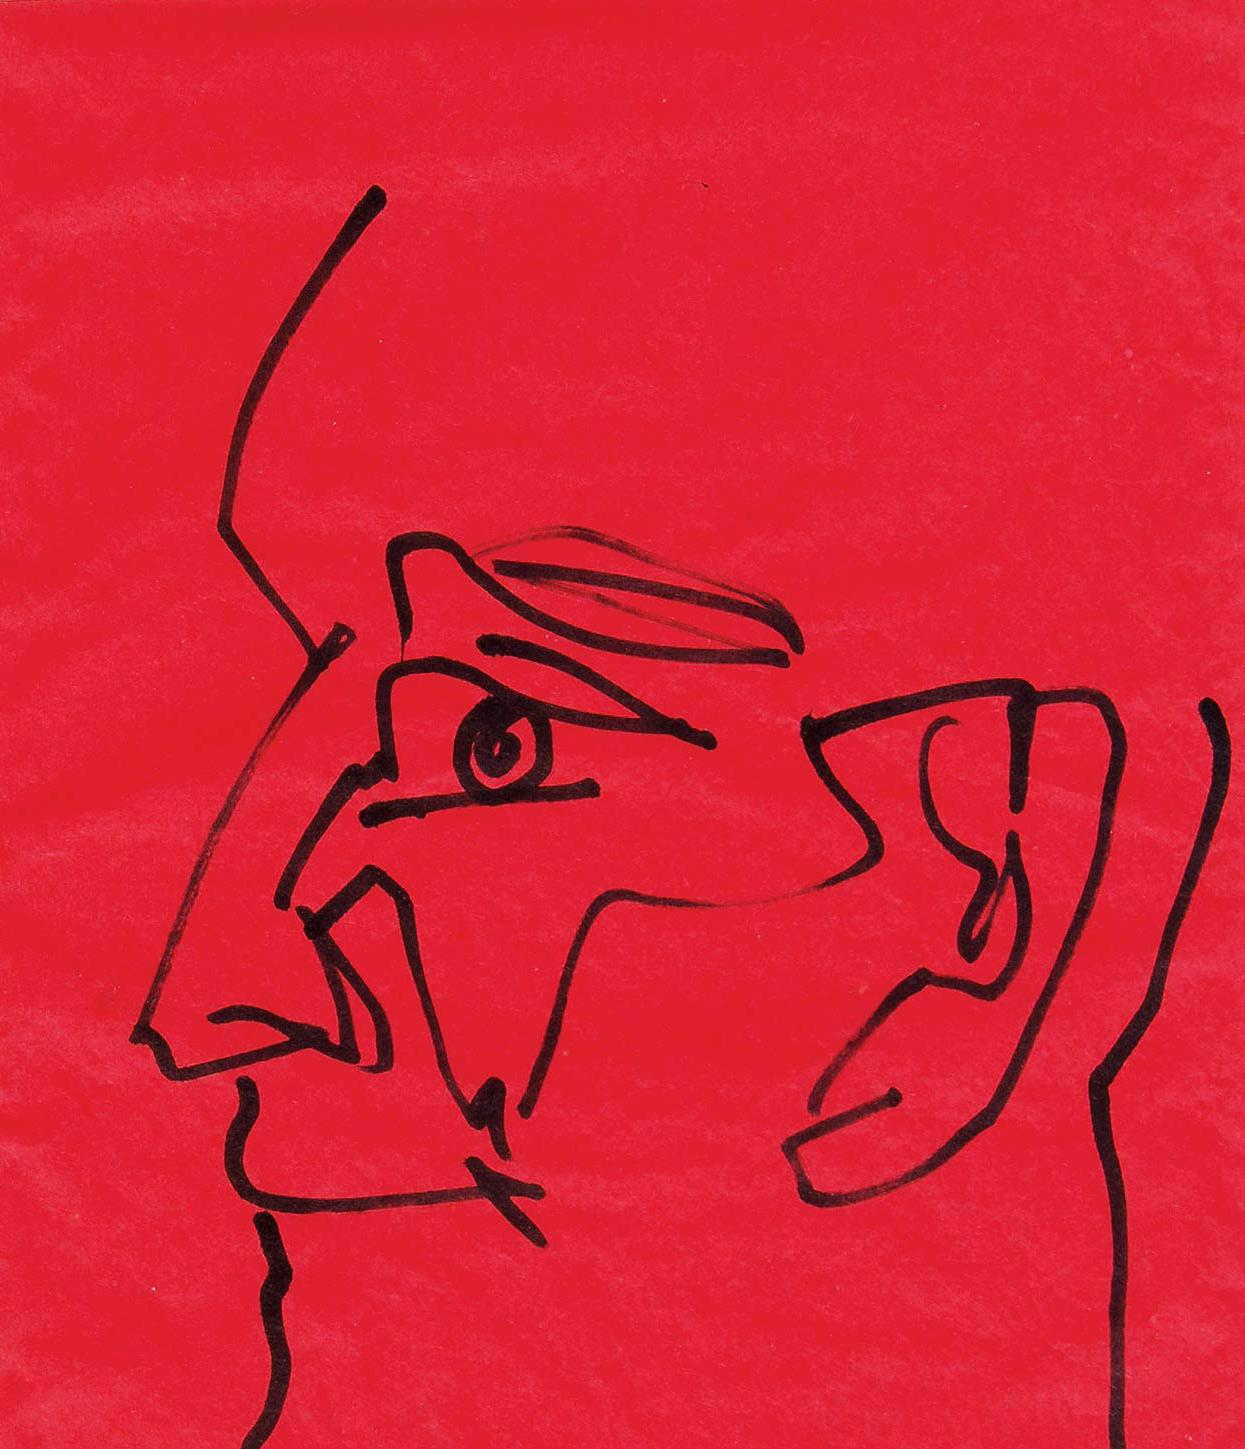 Head, Pen & Ink on Coloured Paper, Red, Black by Indian Artist 